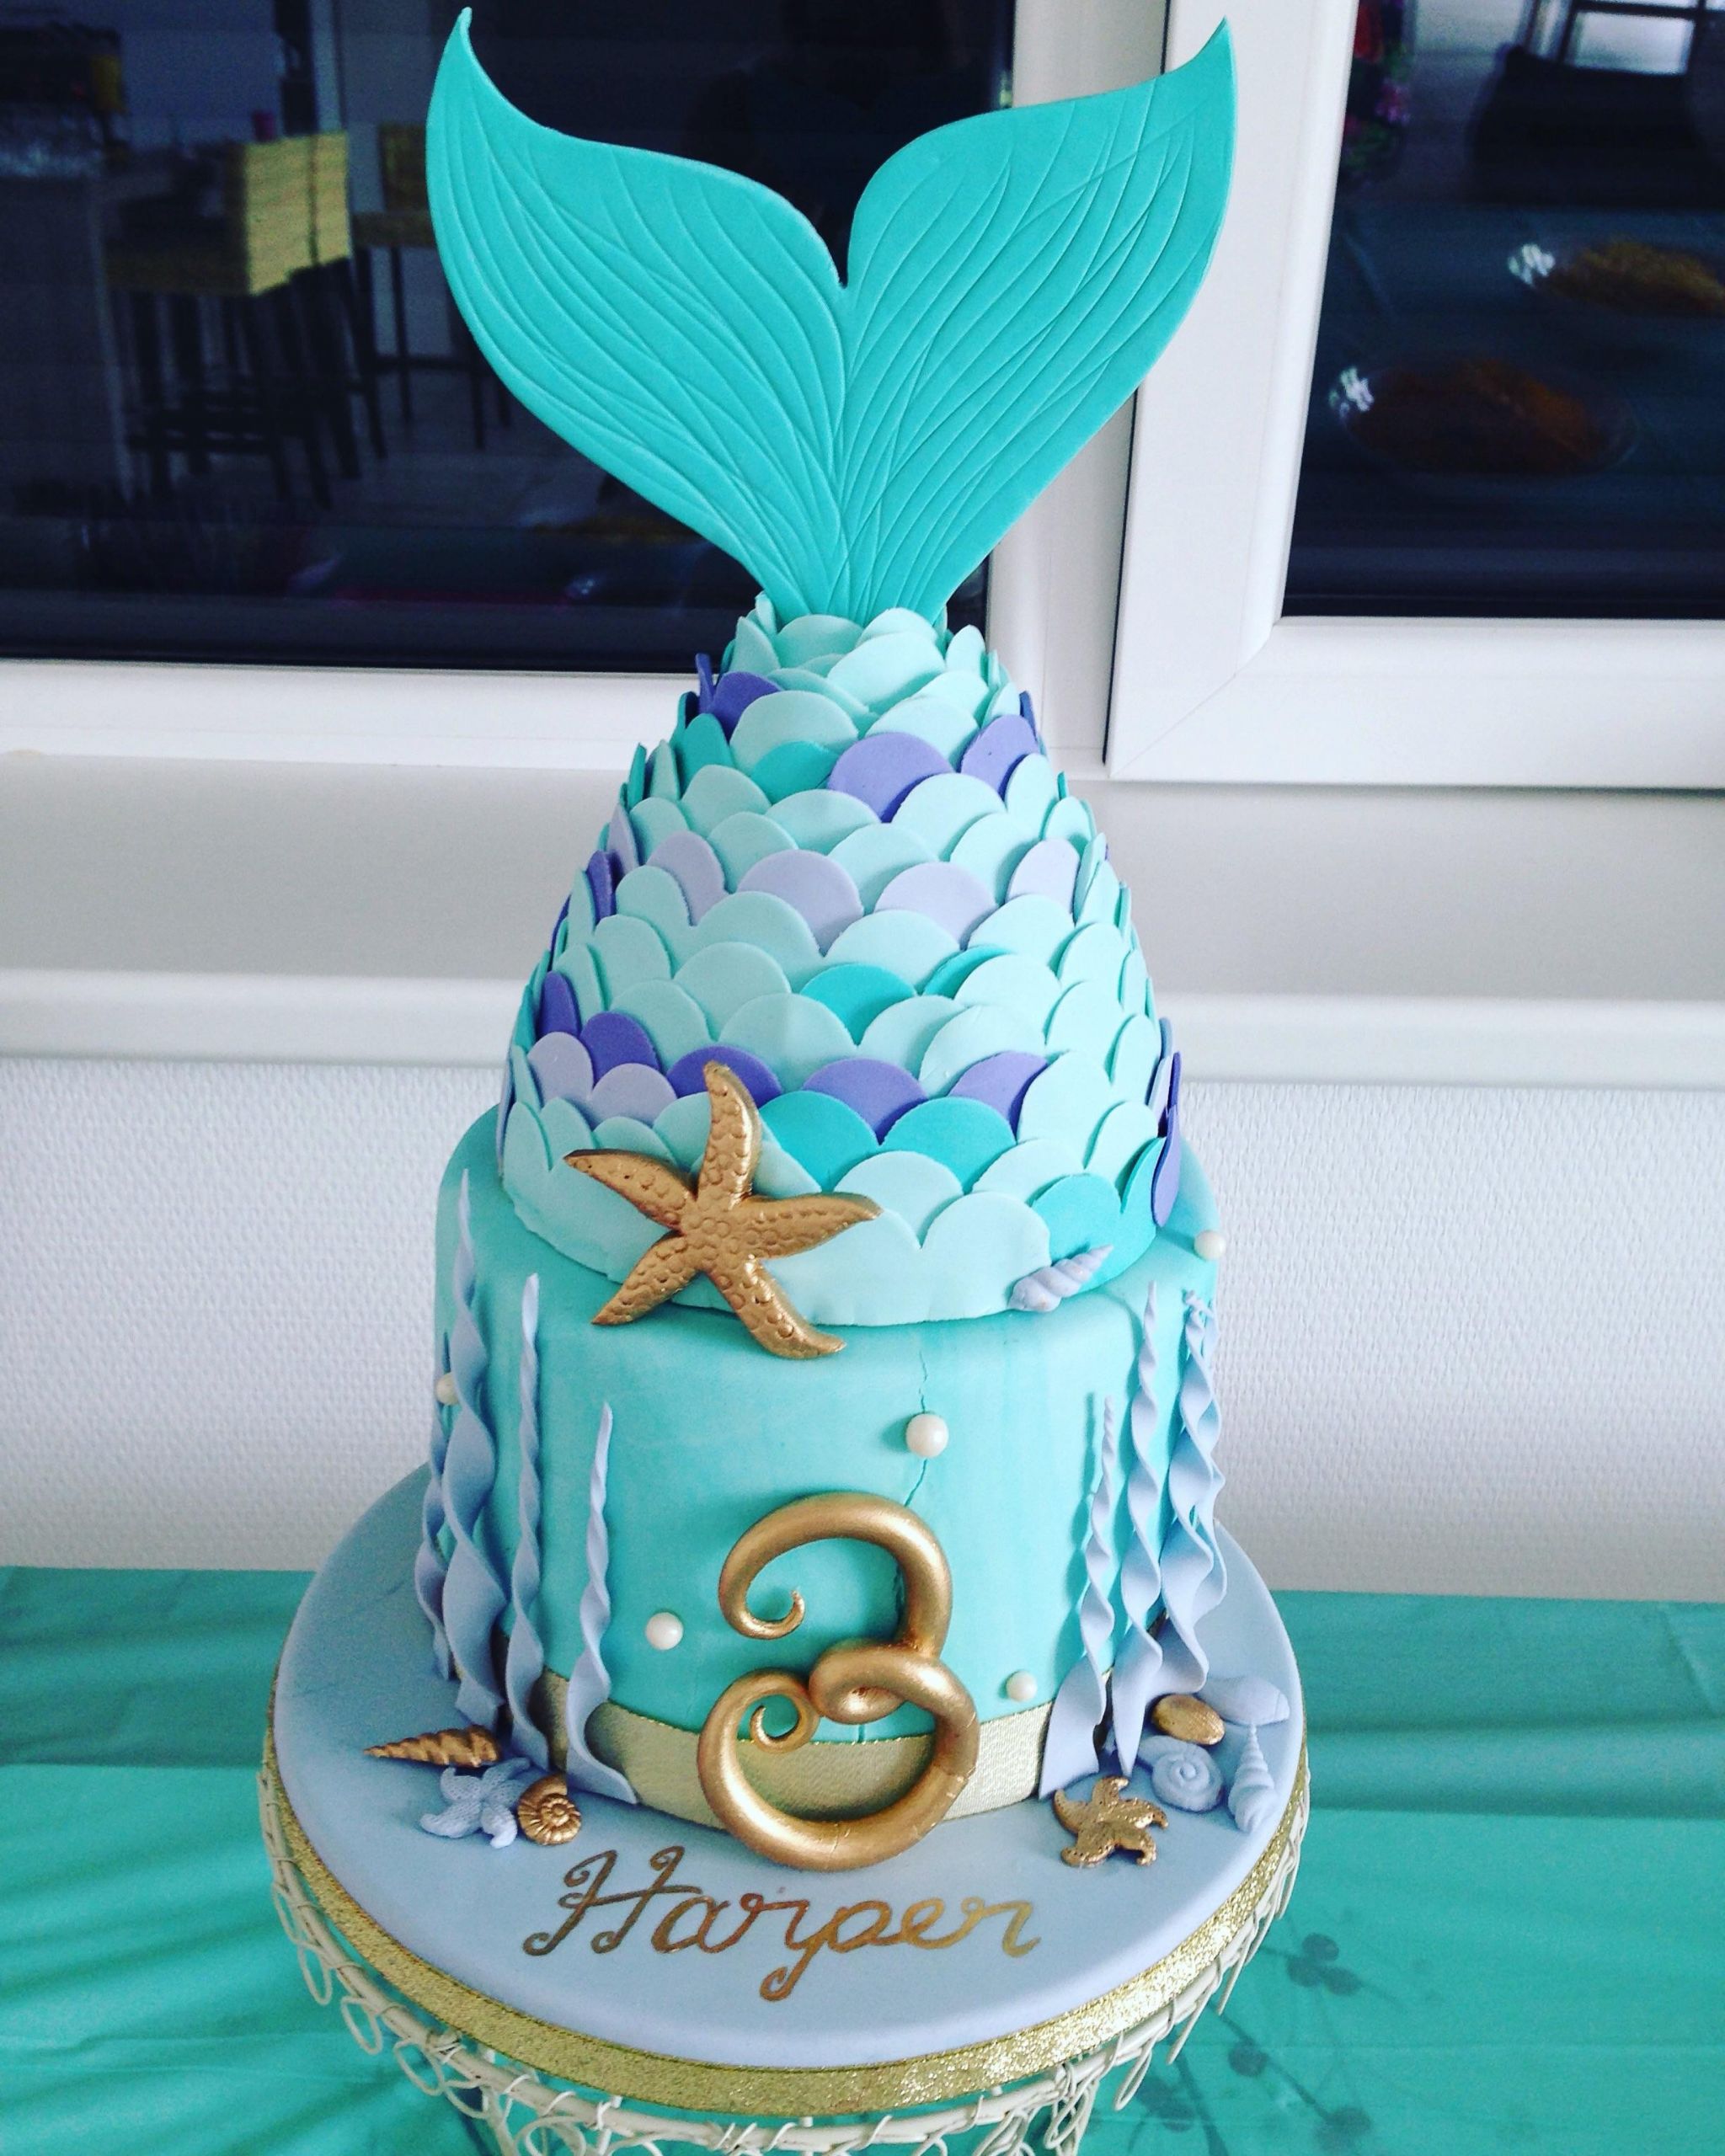 Mermaid Birthday Cakes
 Mermaid birthday cake I made for my daughters 3rd birthday